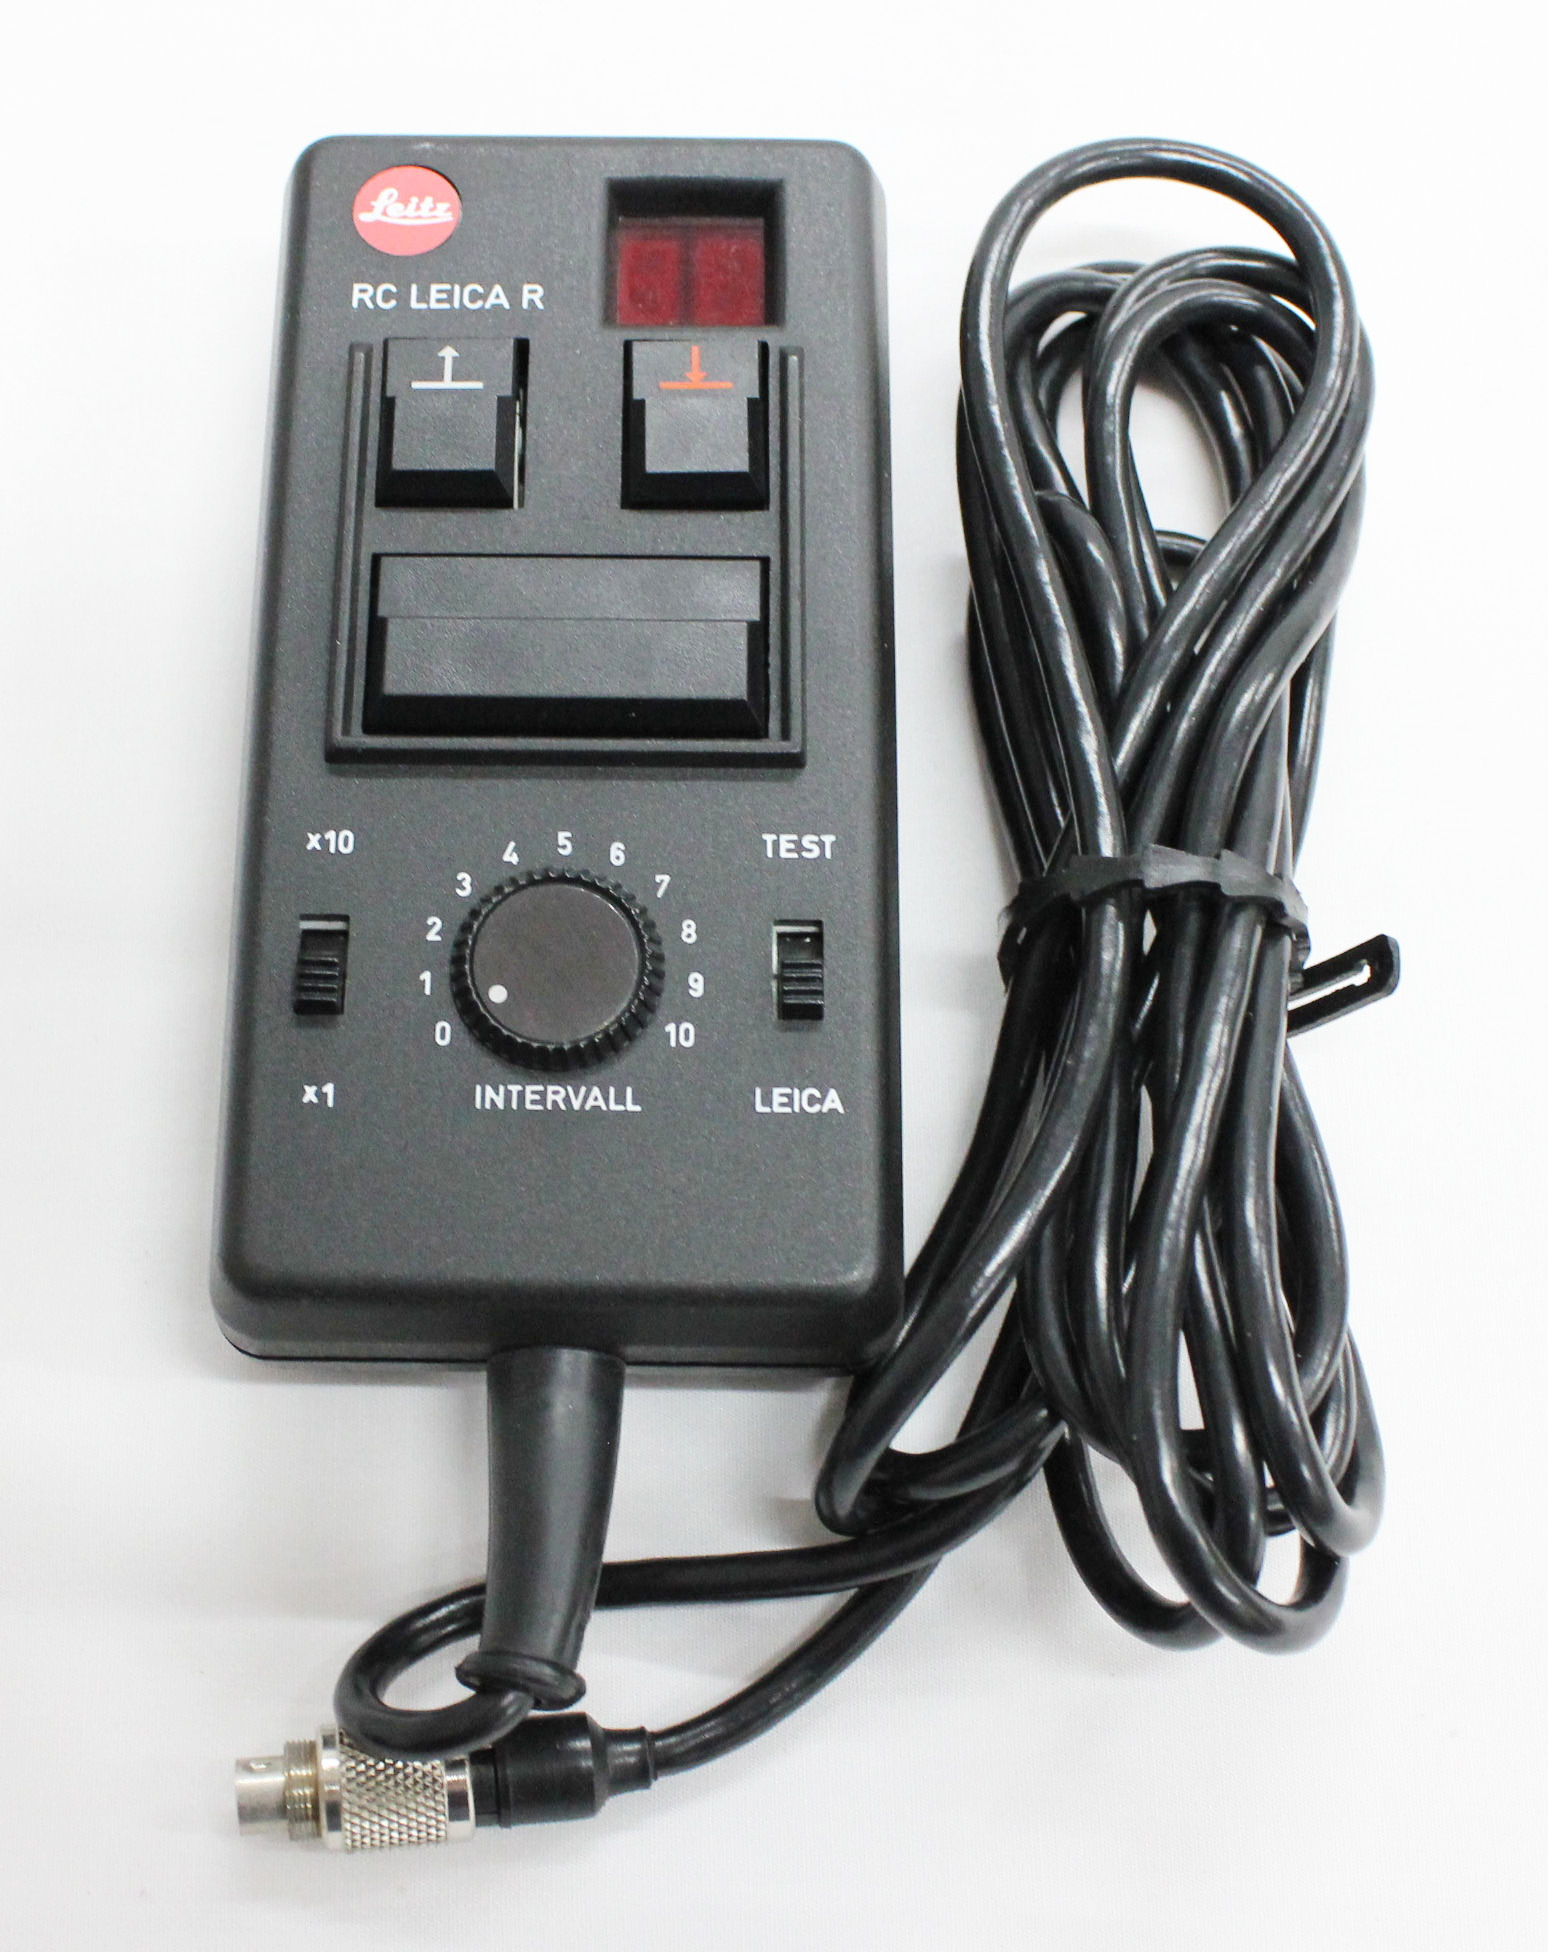 [Near Mint] Leitz; RC Leica R Remote Control for Winder & Motor Drive R from Japan